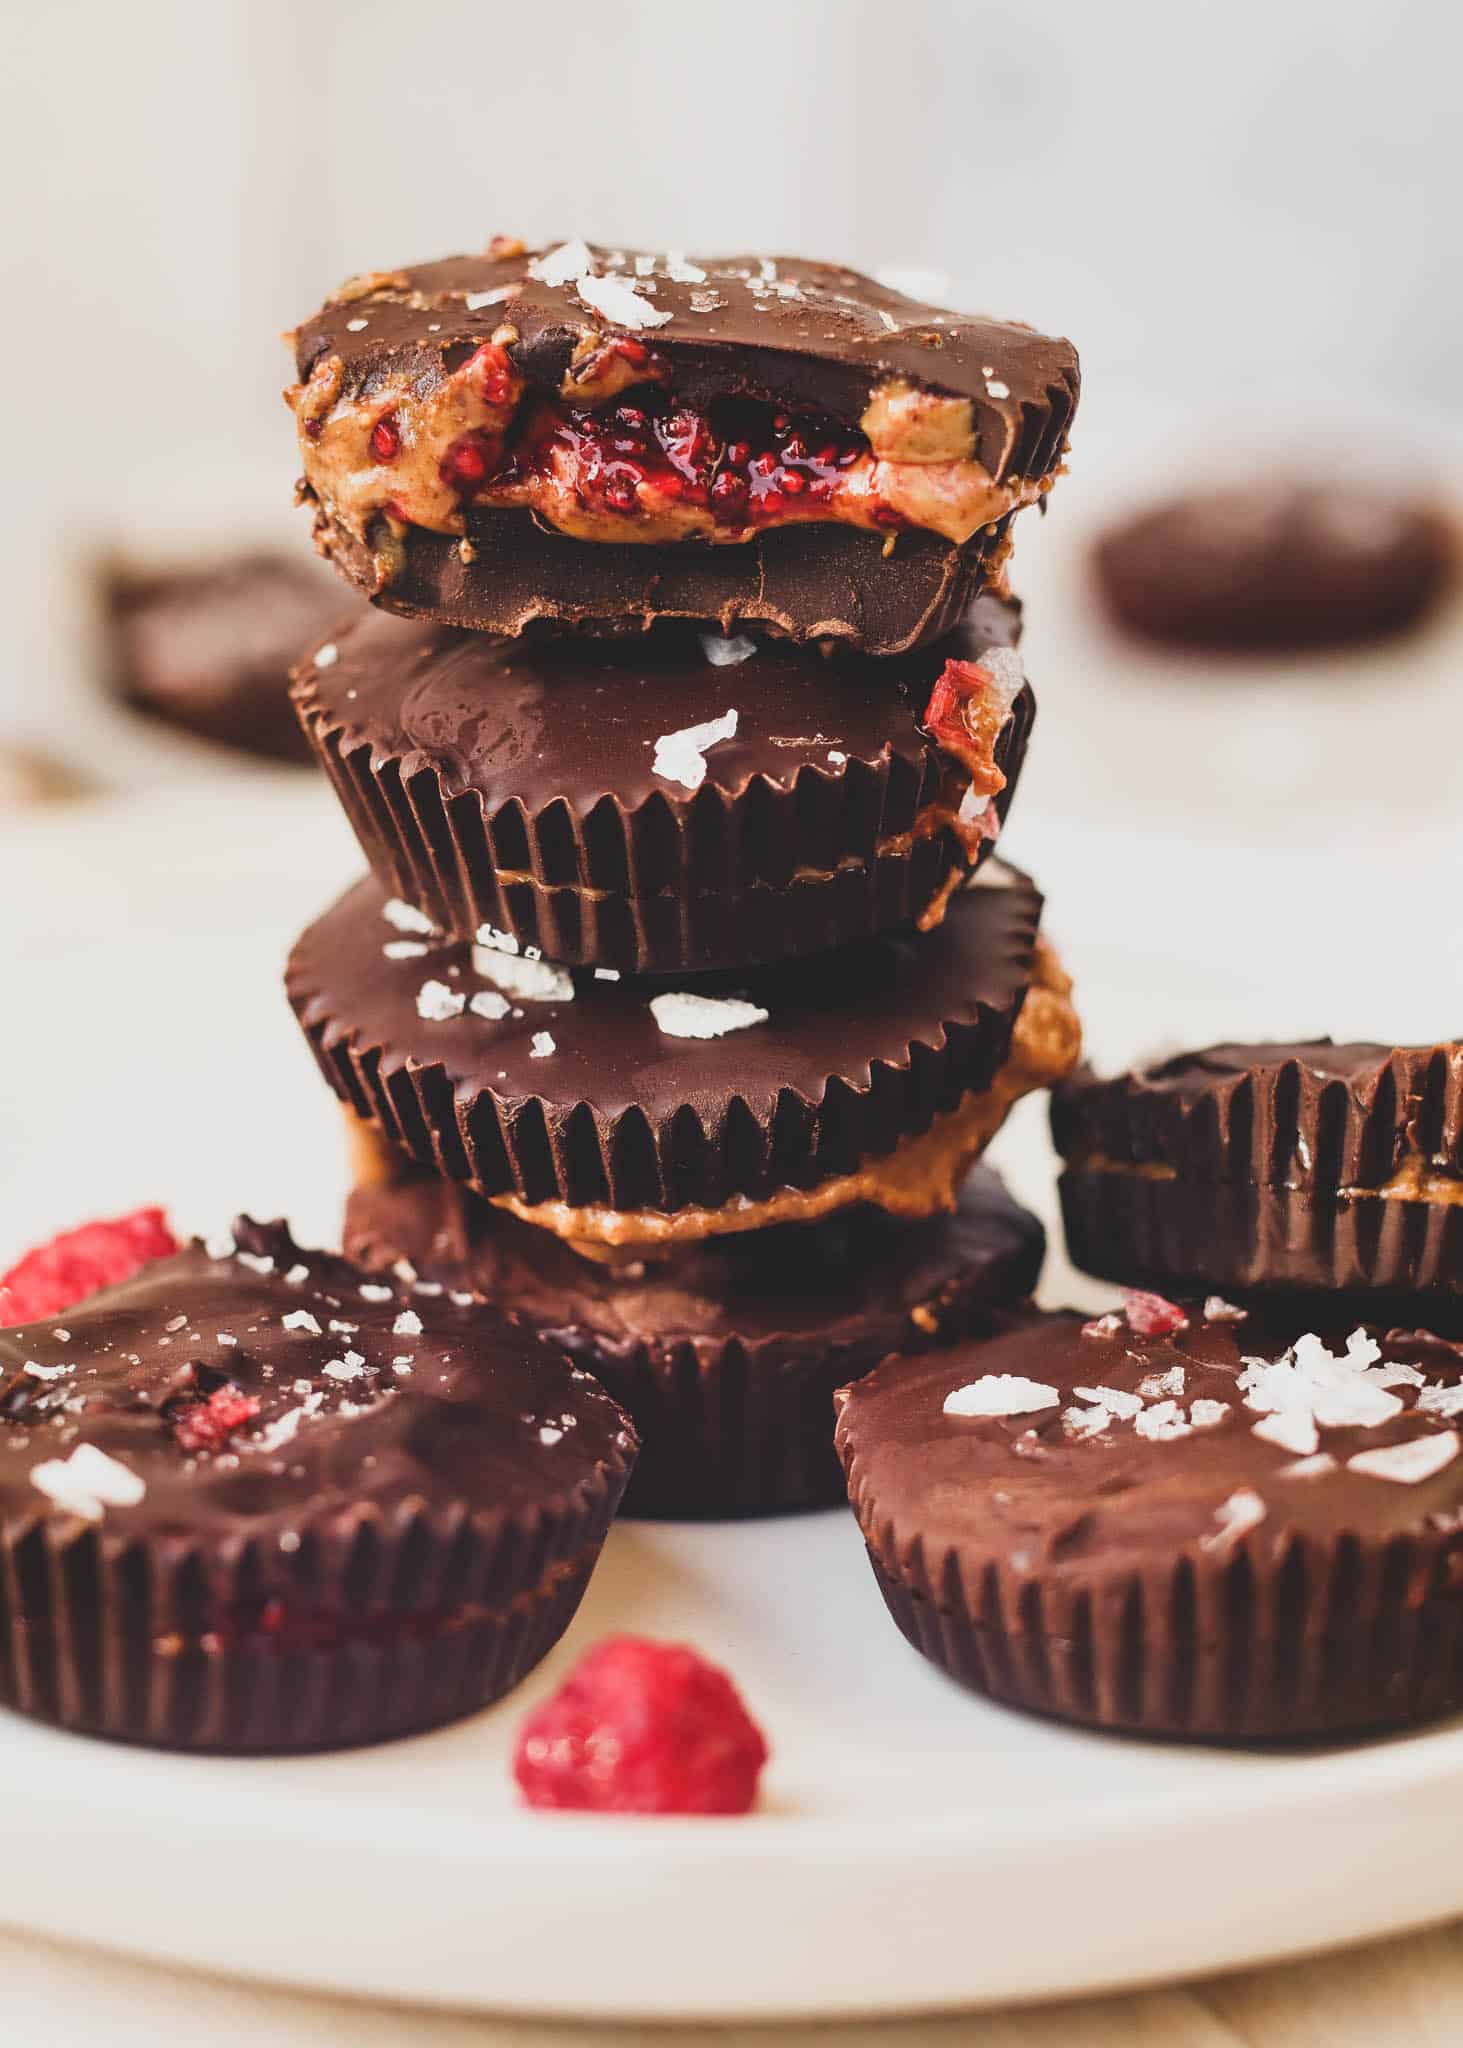 Chocolate Almond Butter Cups with Raspberry